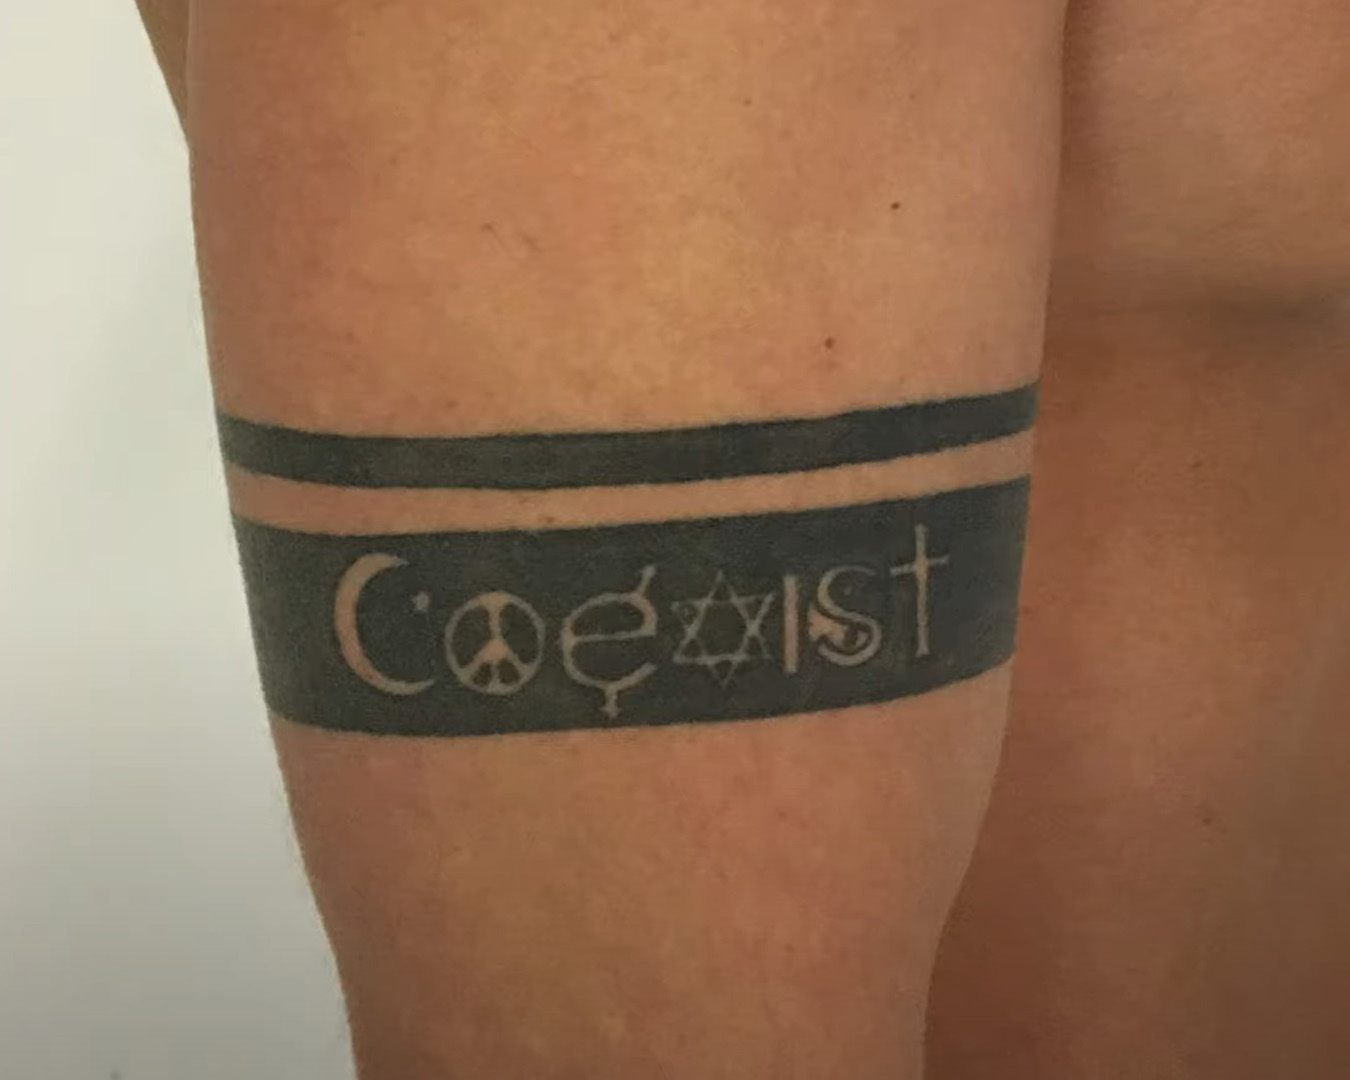 Coexist armband tattoo before cover up